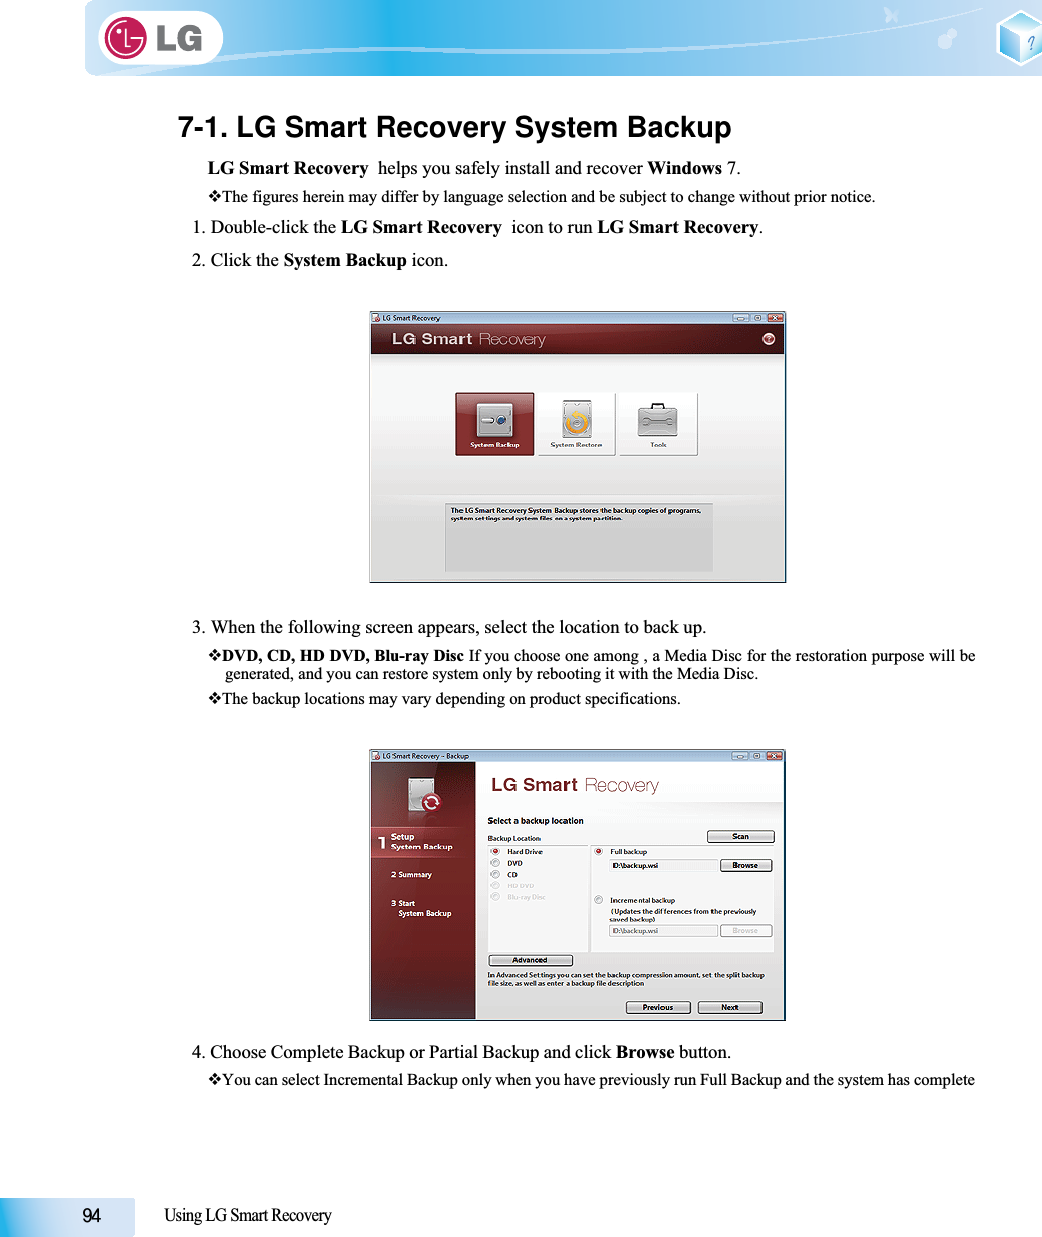 Using LG Smart Recovery7-1. LG Smart Recovery System BackupLG Smart Recovery  helps you safely install and recover Windows 7.The figures herein may differ by language selection and be subject to change without prior notice.1. Double-click the LG Smart Recovery  icon to run LG Smart Recovery.2. Click the System Backup icon.3. When the following screen appears, select the location to back up.DVD, CD, HD DVD, Blu-ray Disc If you choose one among , a Media Disc for the restoration purpose will begenerated, and you can restore system only by rebooting it with the Media Disc.The backup locations may vary depending on product specifications. 4. Choose Complete Backup or Partial Backup and click Browse button. You can select Incremental Backup only when you have previously run Full Backup and the system has complete